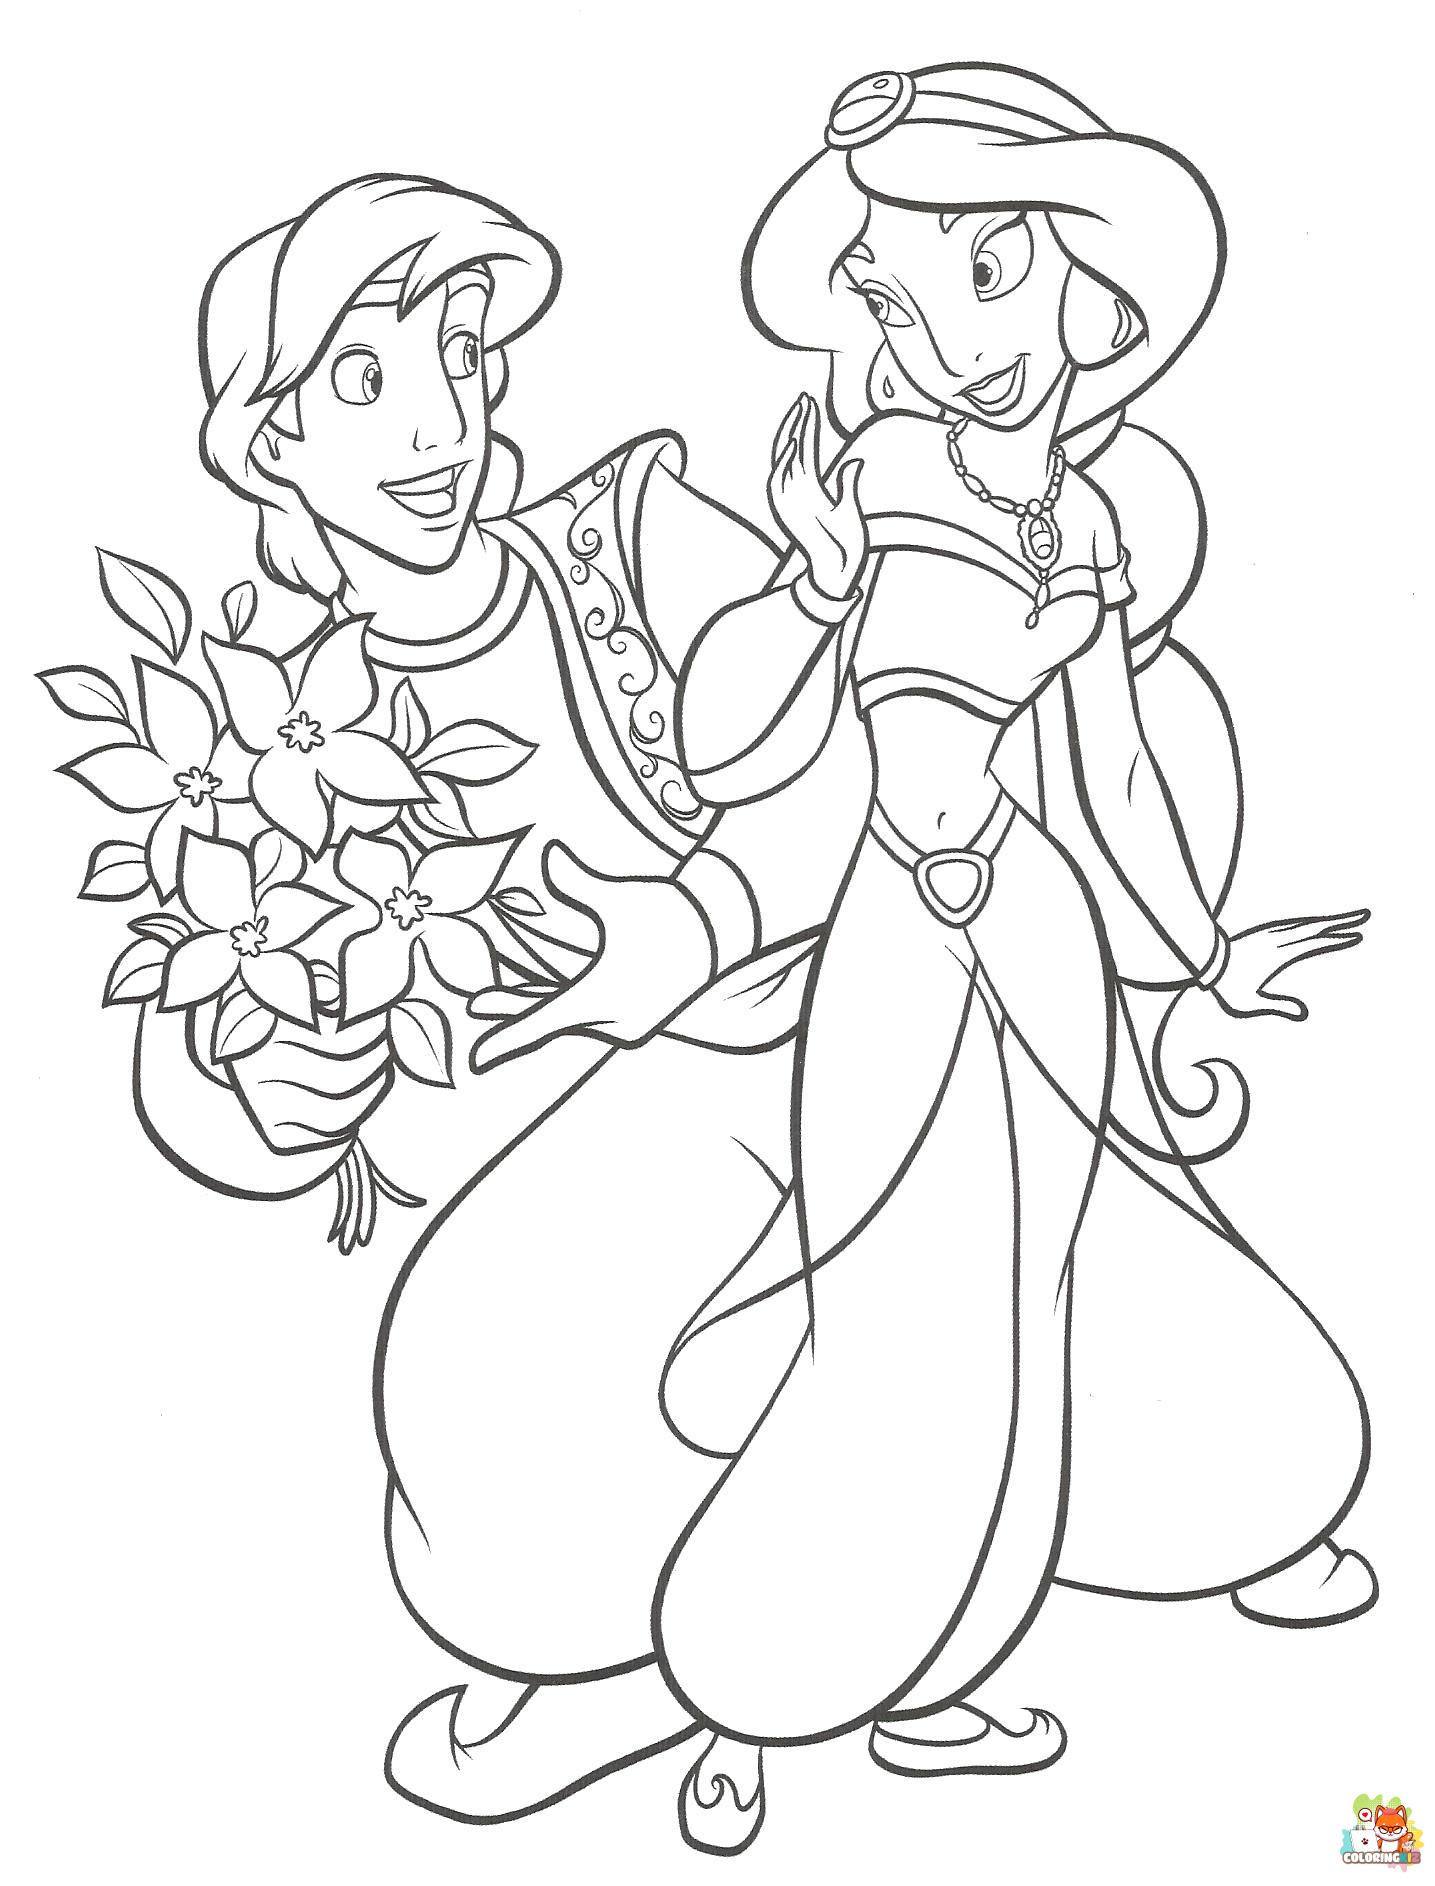 Jasmine and Aladdin Coloring Pages 4